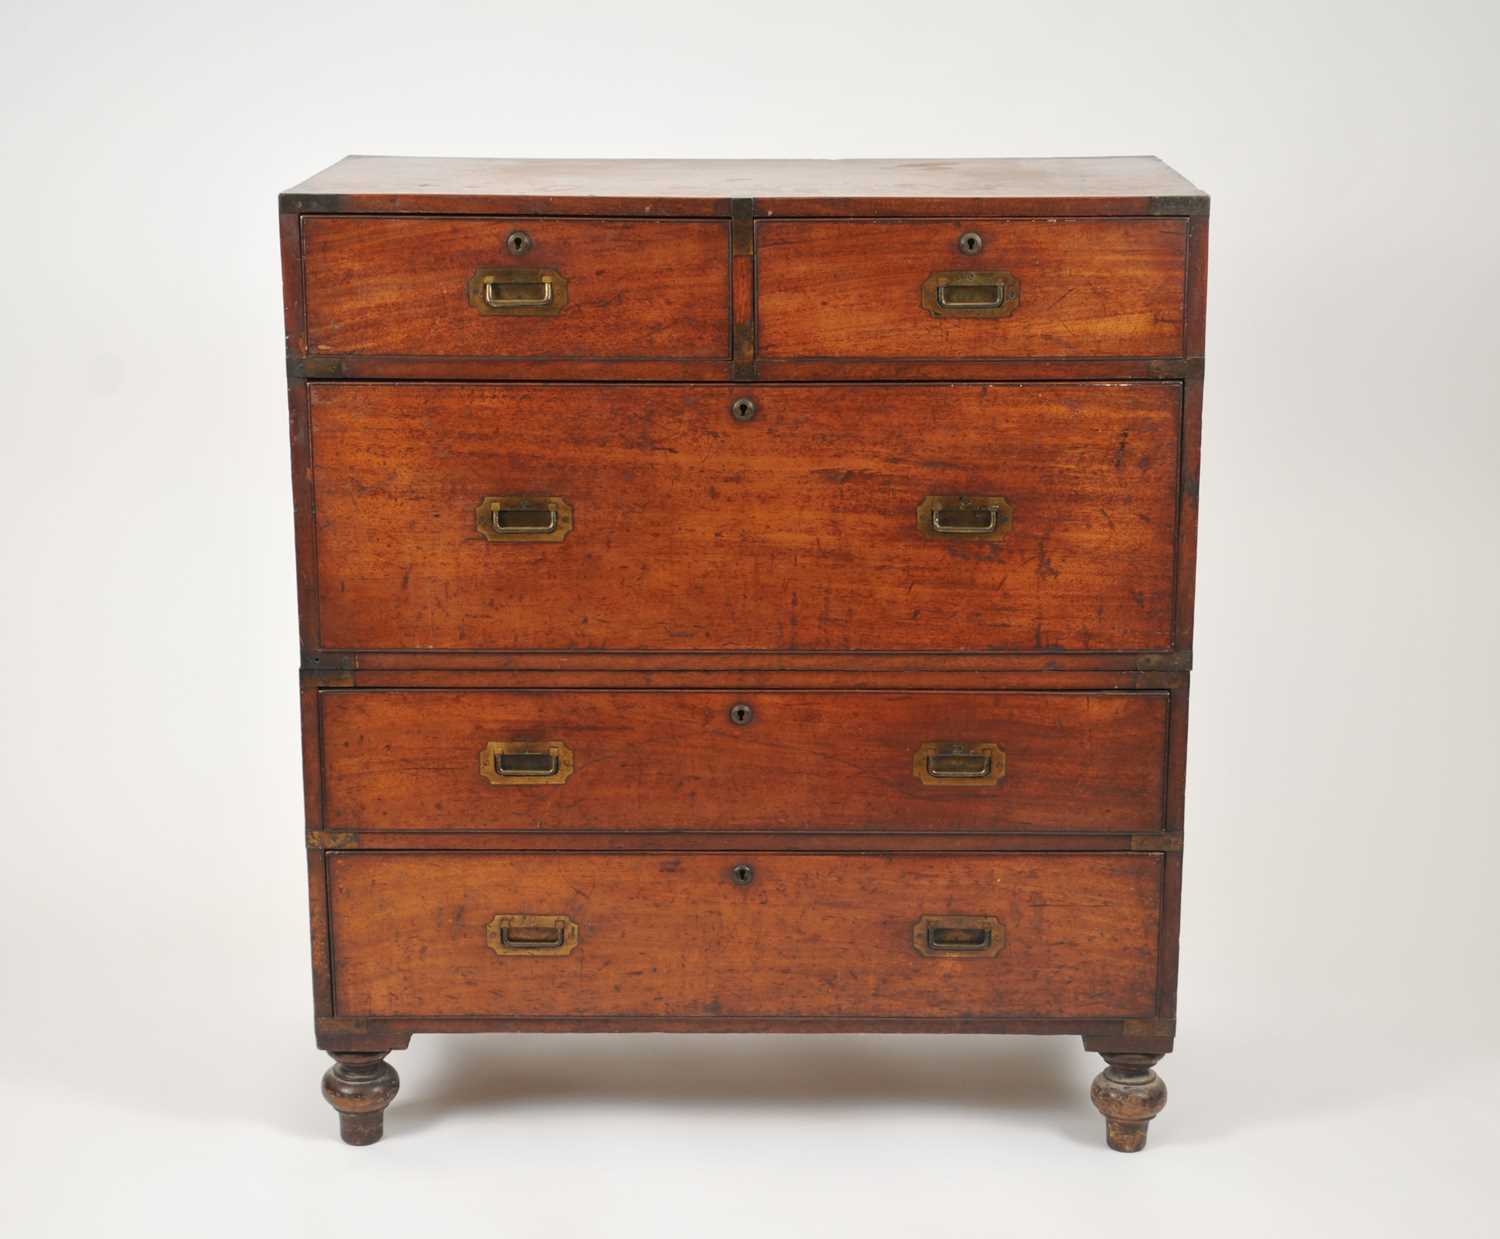 Lot 473 - A 19th century mahogany campaign chest of drawers